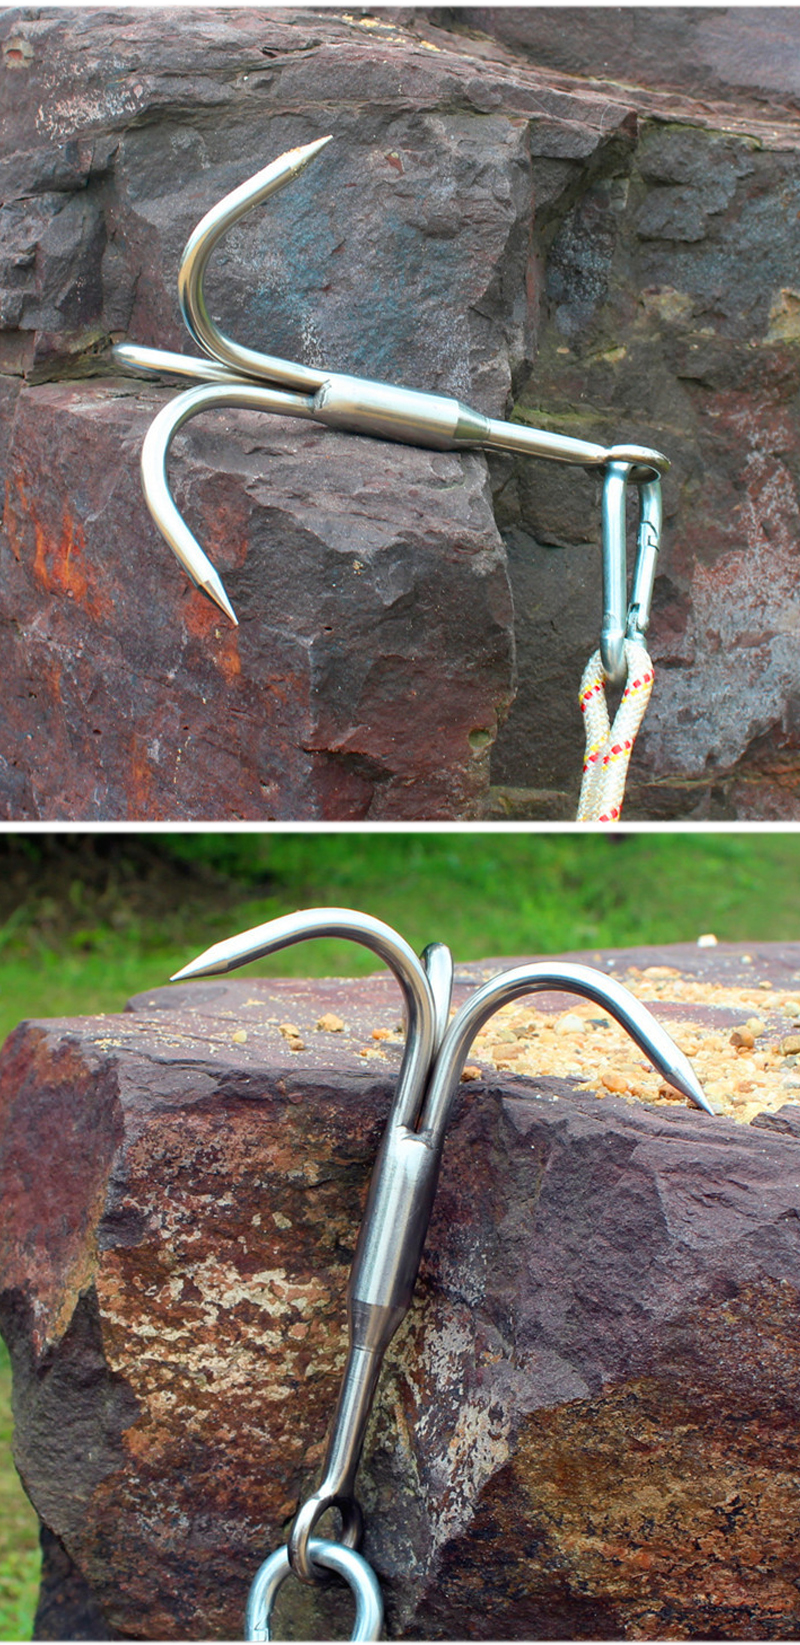 135cm-Grapping-Hook-Outdoor-Camping-Climbing-Carabiner-Stainless-Claw-Clasp-Survival-Accessory-1355032